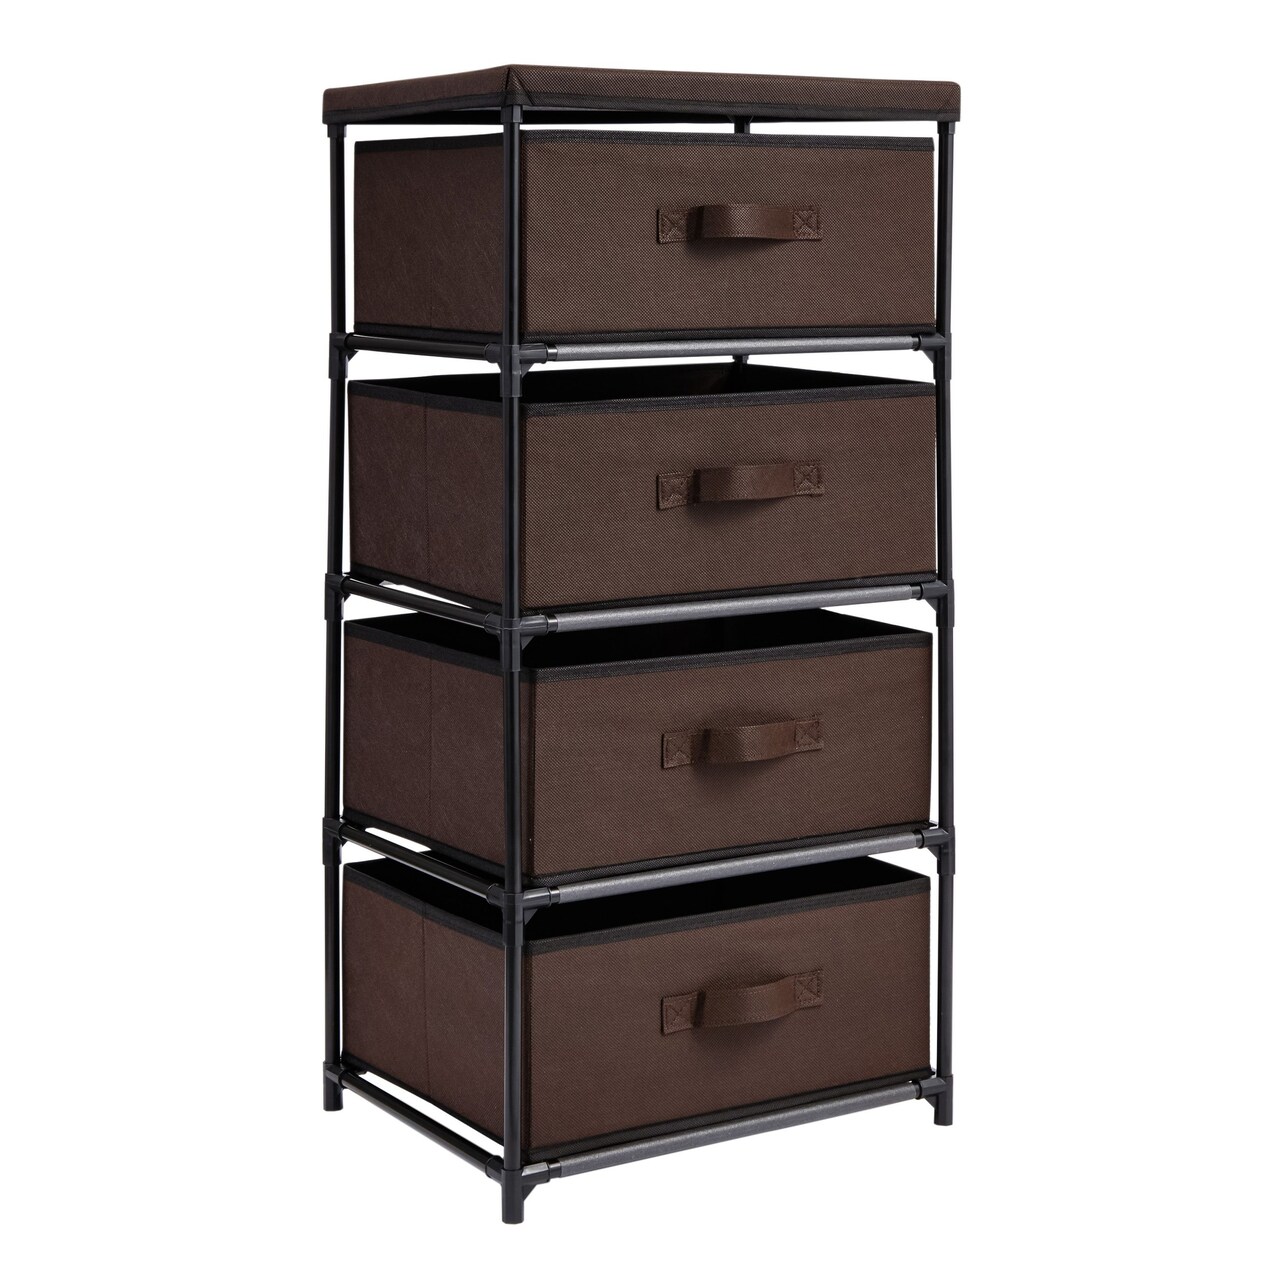 4 Drawer Dresser for Bedroom, Clothes Organizer Fabric Storage Tower for Clothing, Linens, Closet (Dark Brown, 16.5 x 33 In)